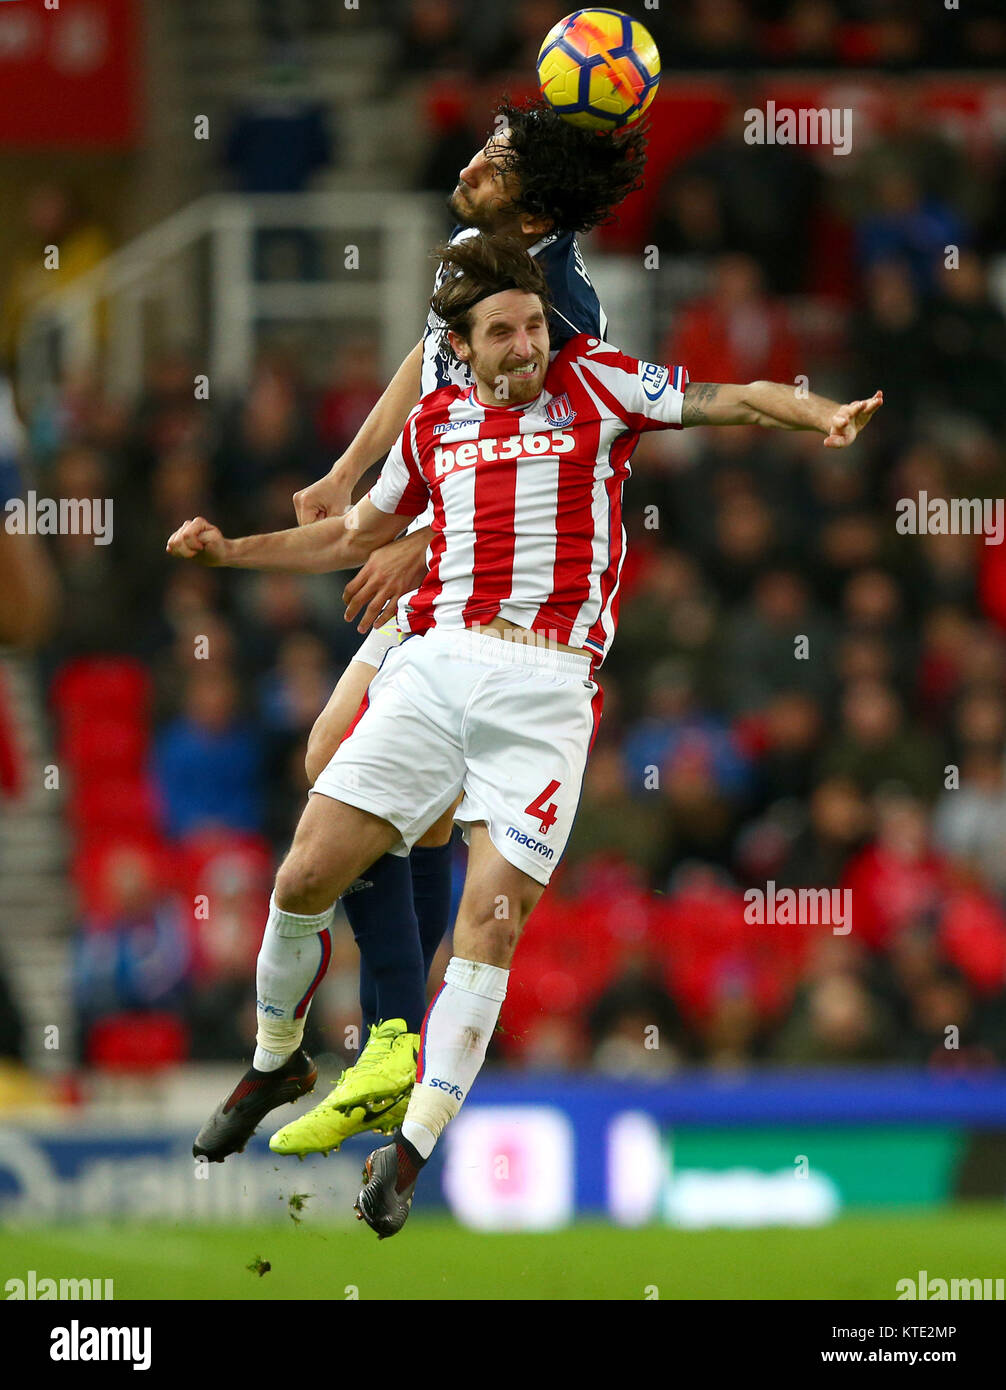 Stoke City's Joe Allen and West Bromwich Albion's Ahmed Hegazy battle for the ball during the Premier League match at the Bet365 Stadium, Stoke. Stock Photo